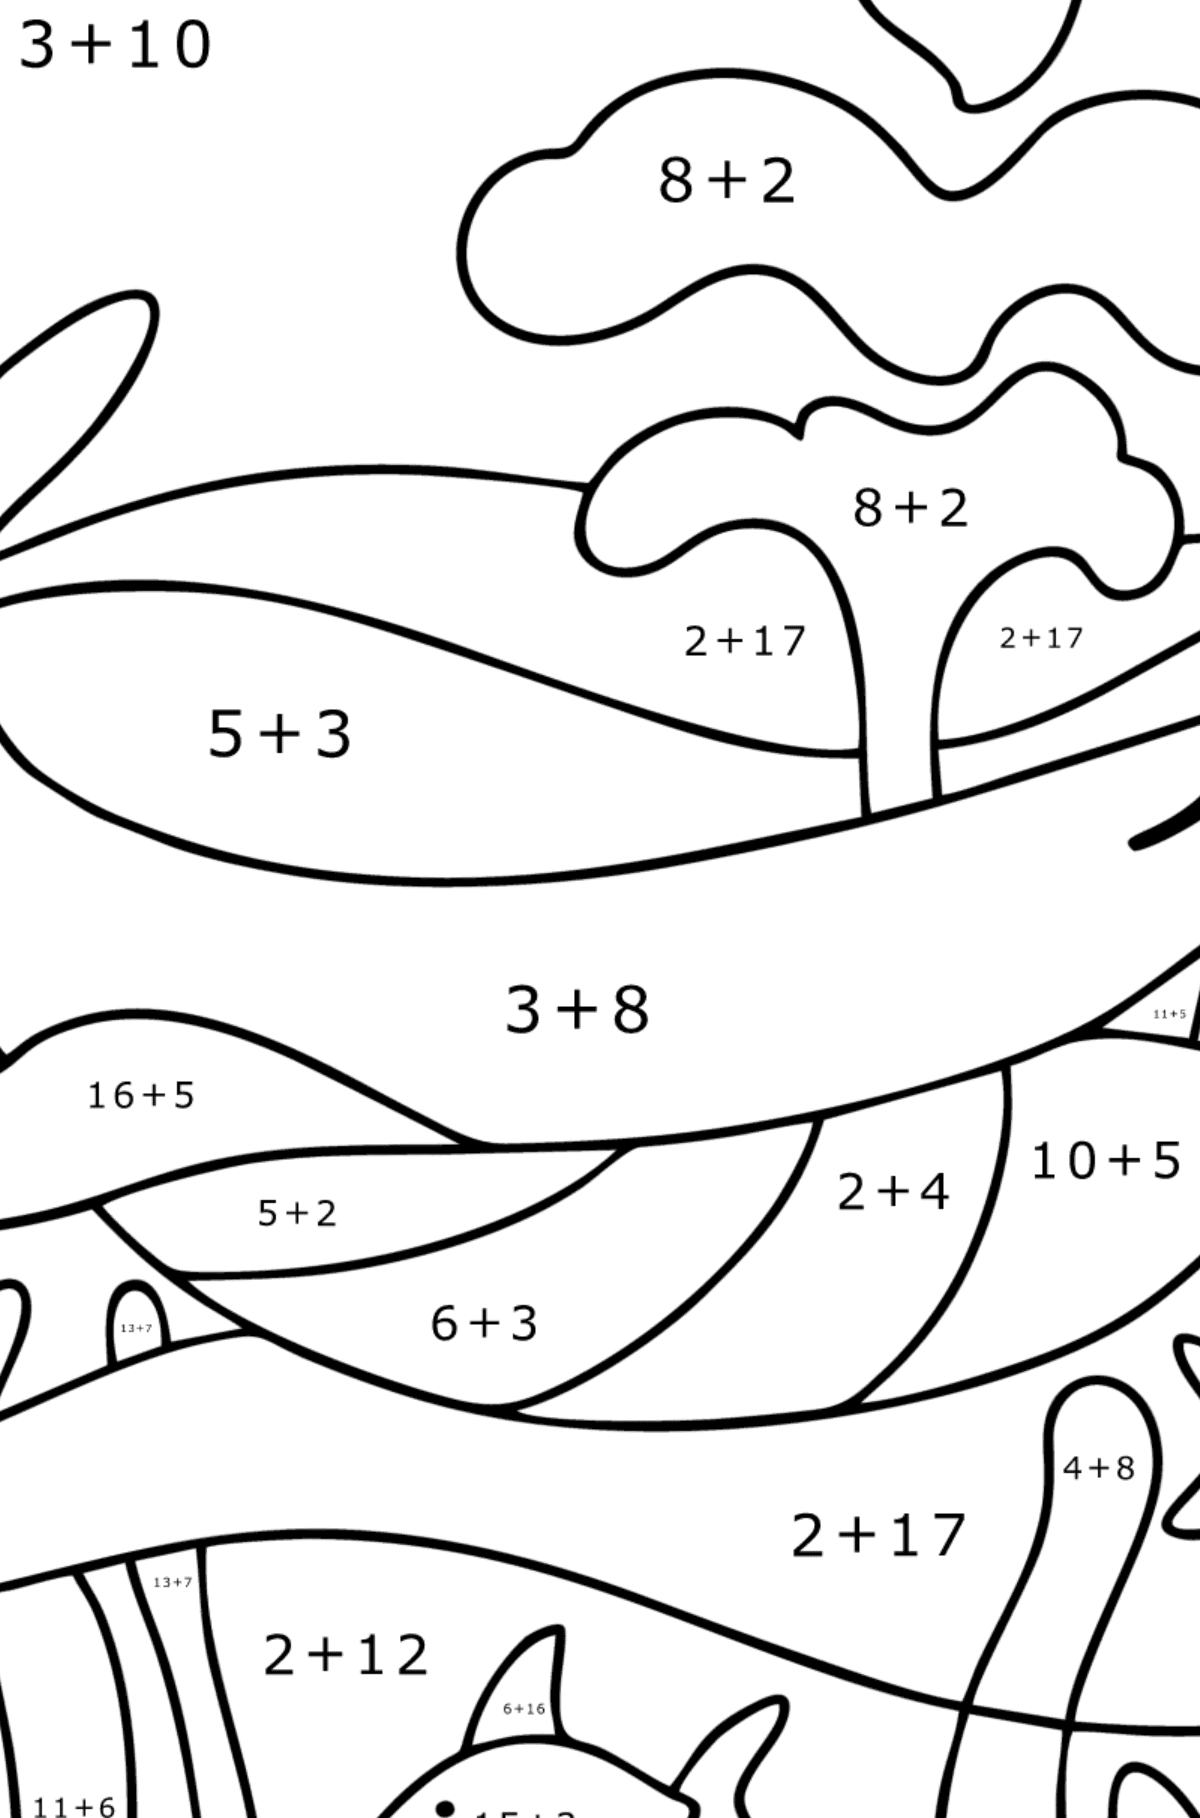 Cute sperm whale coloring page - Math Coloring - Addition for Kids